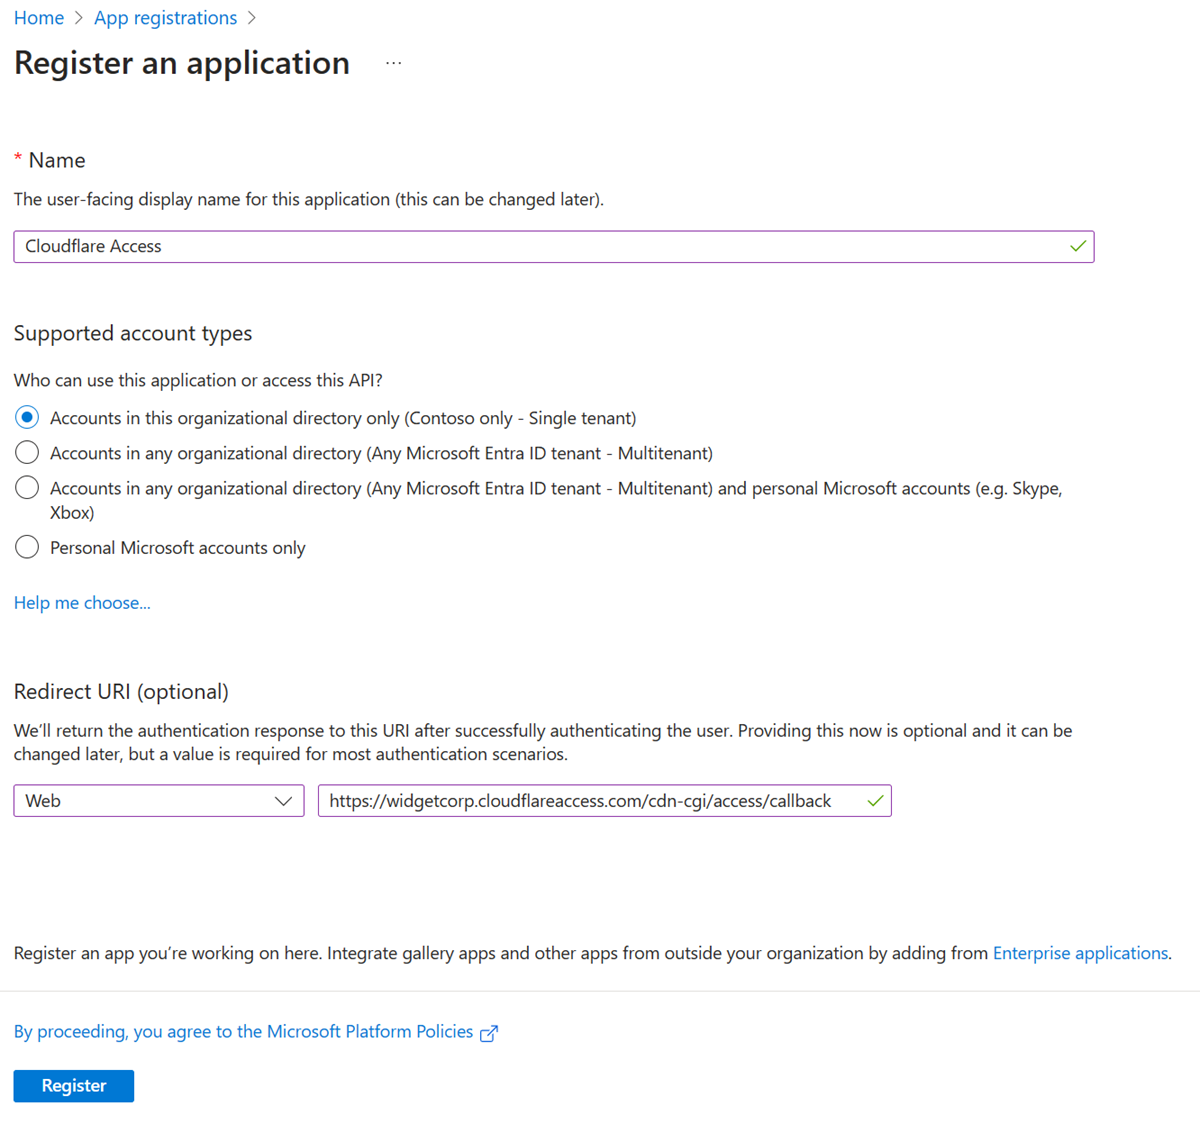 Screenshot of options and selections for Register an application.